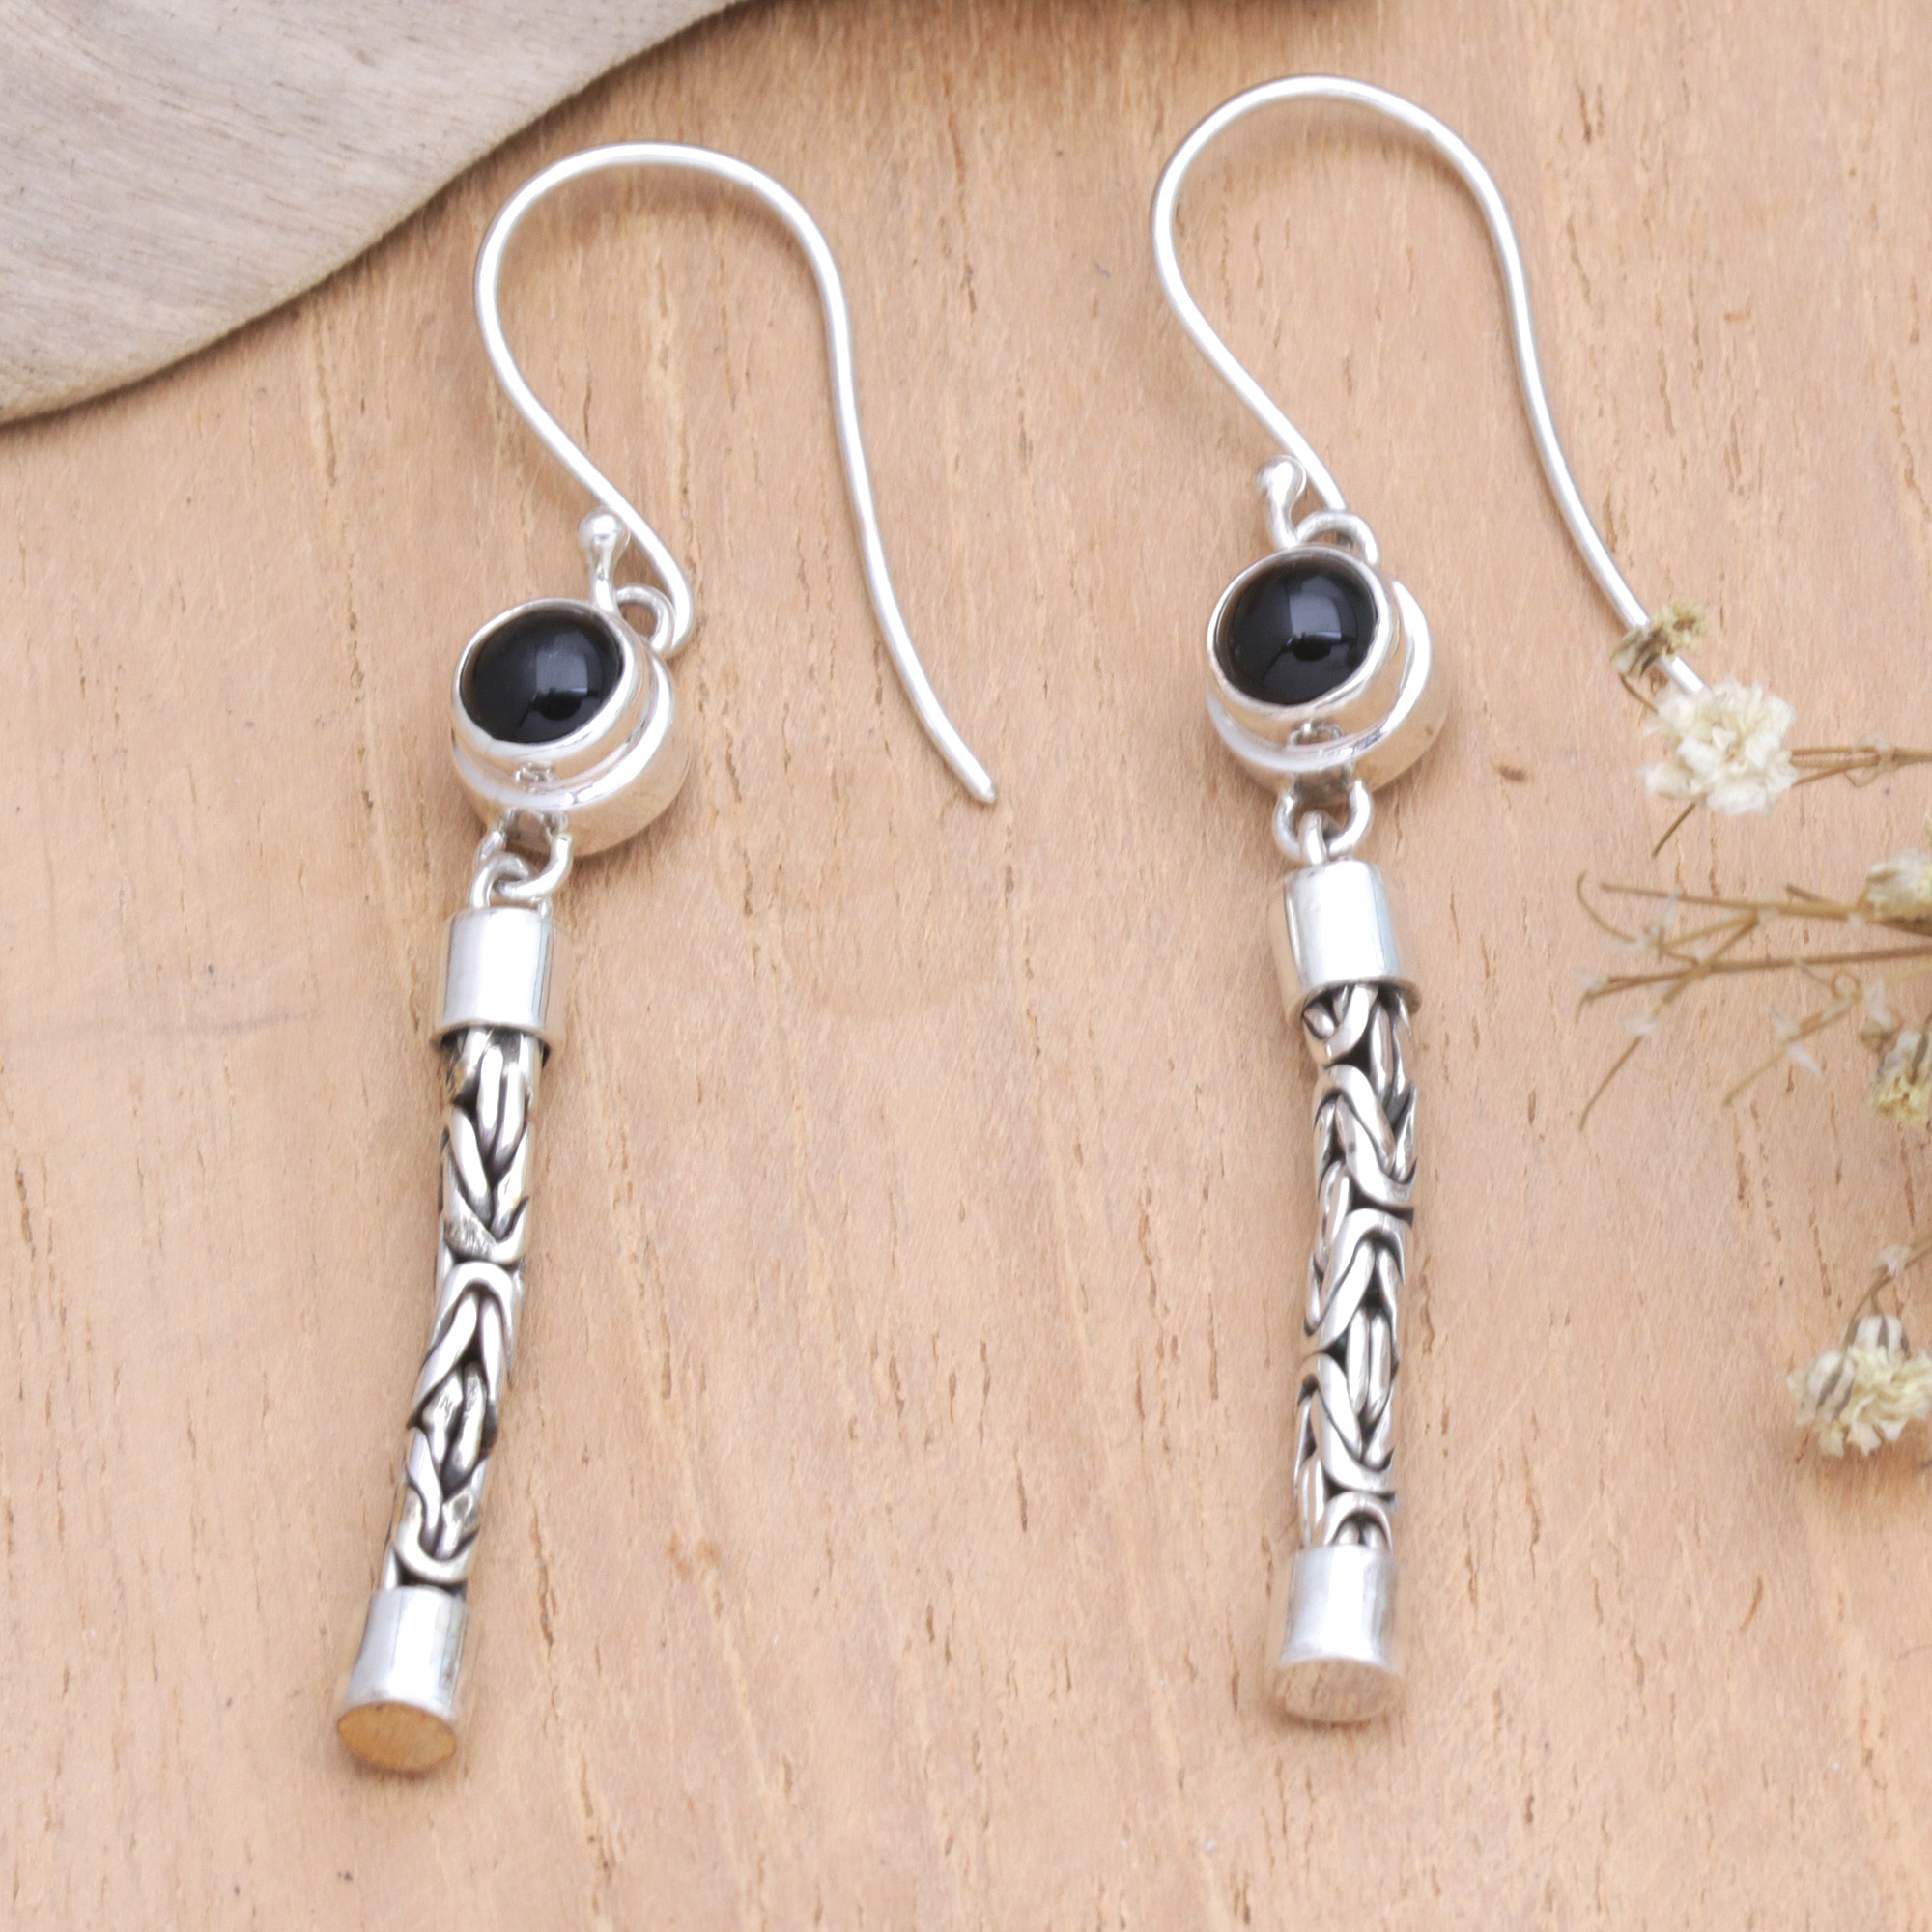 Onyx Sterling Silver Dangle Earrings Crafted in Bali - Courageous